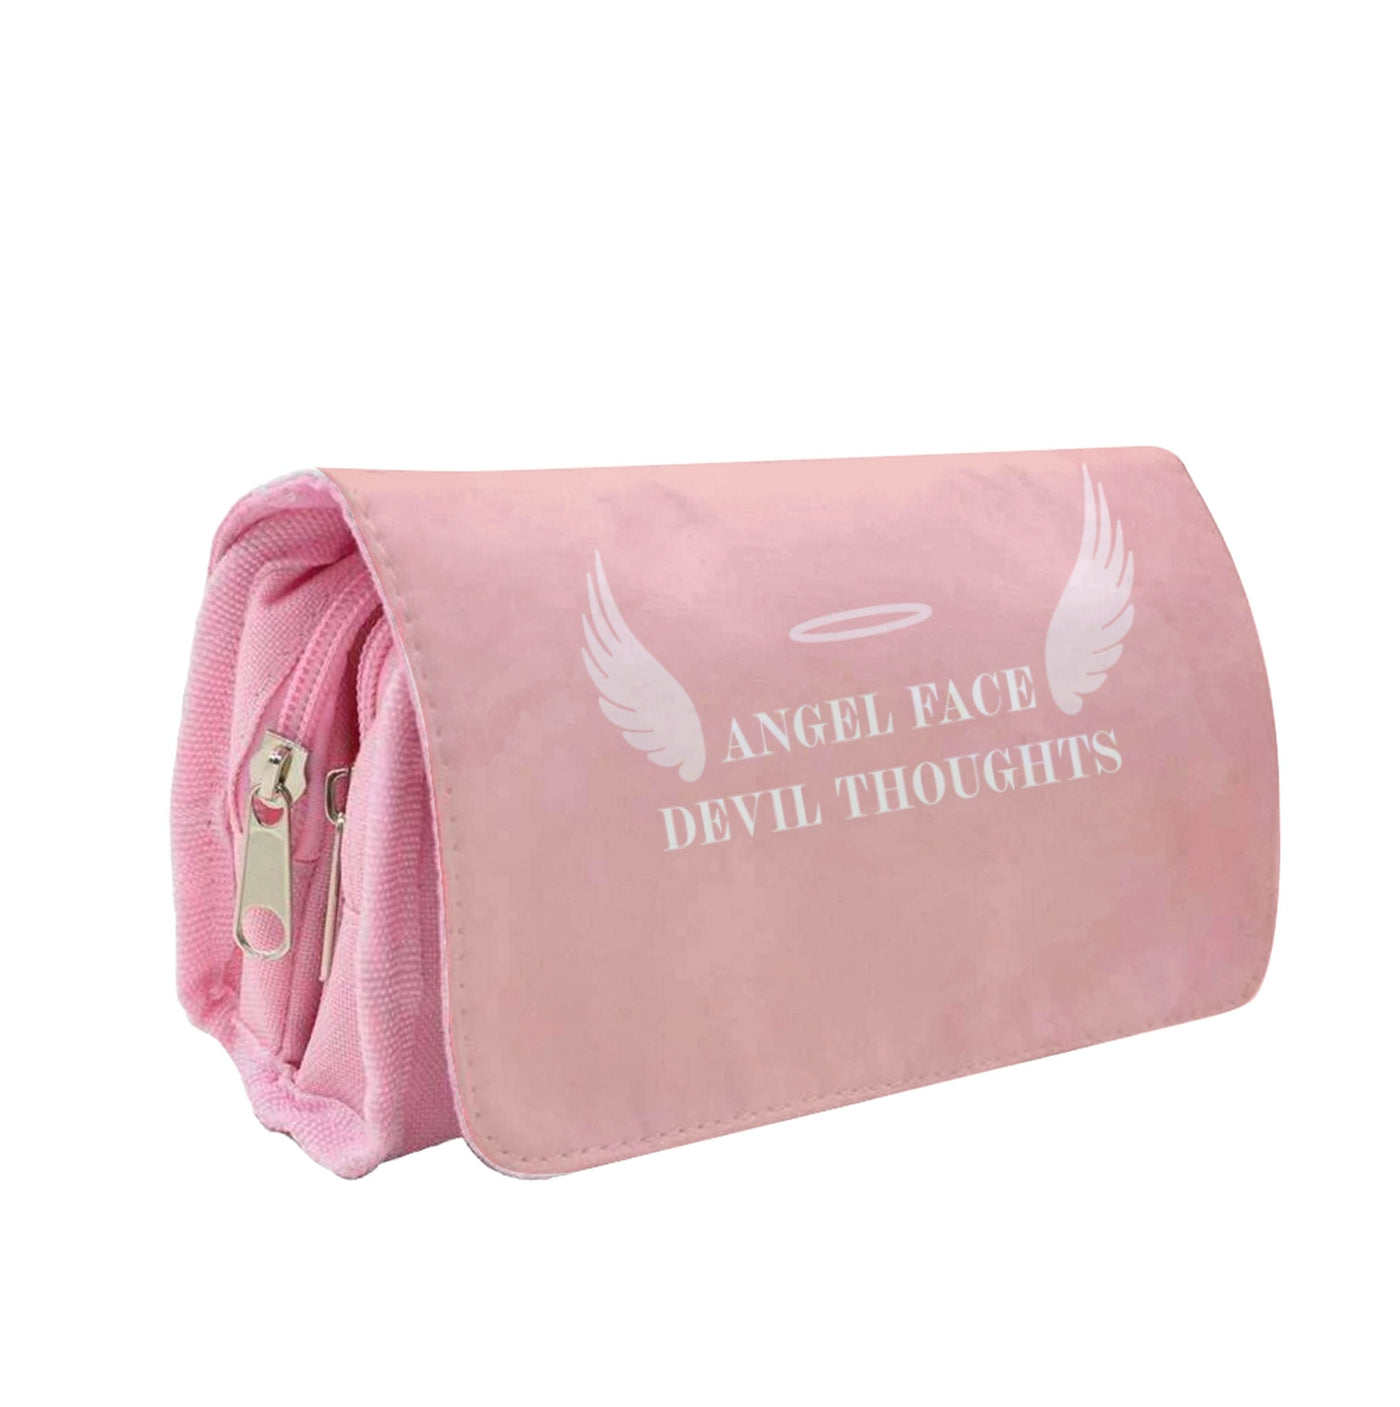 Angel Face Devil Thoughts Pencil Case